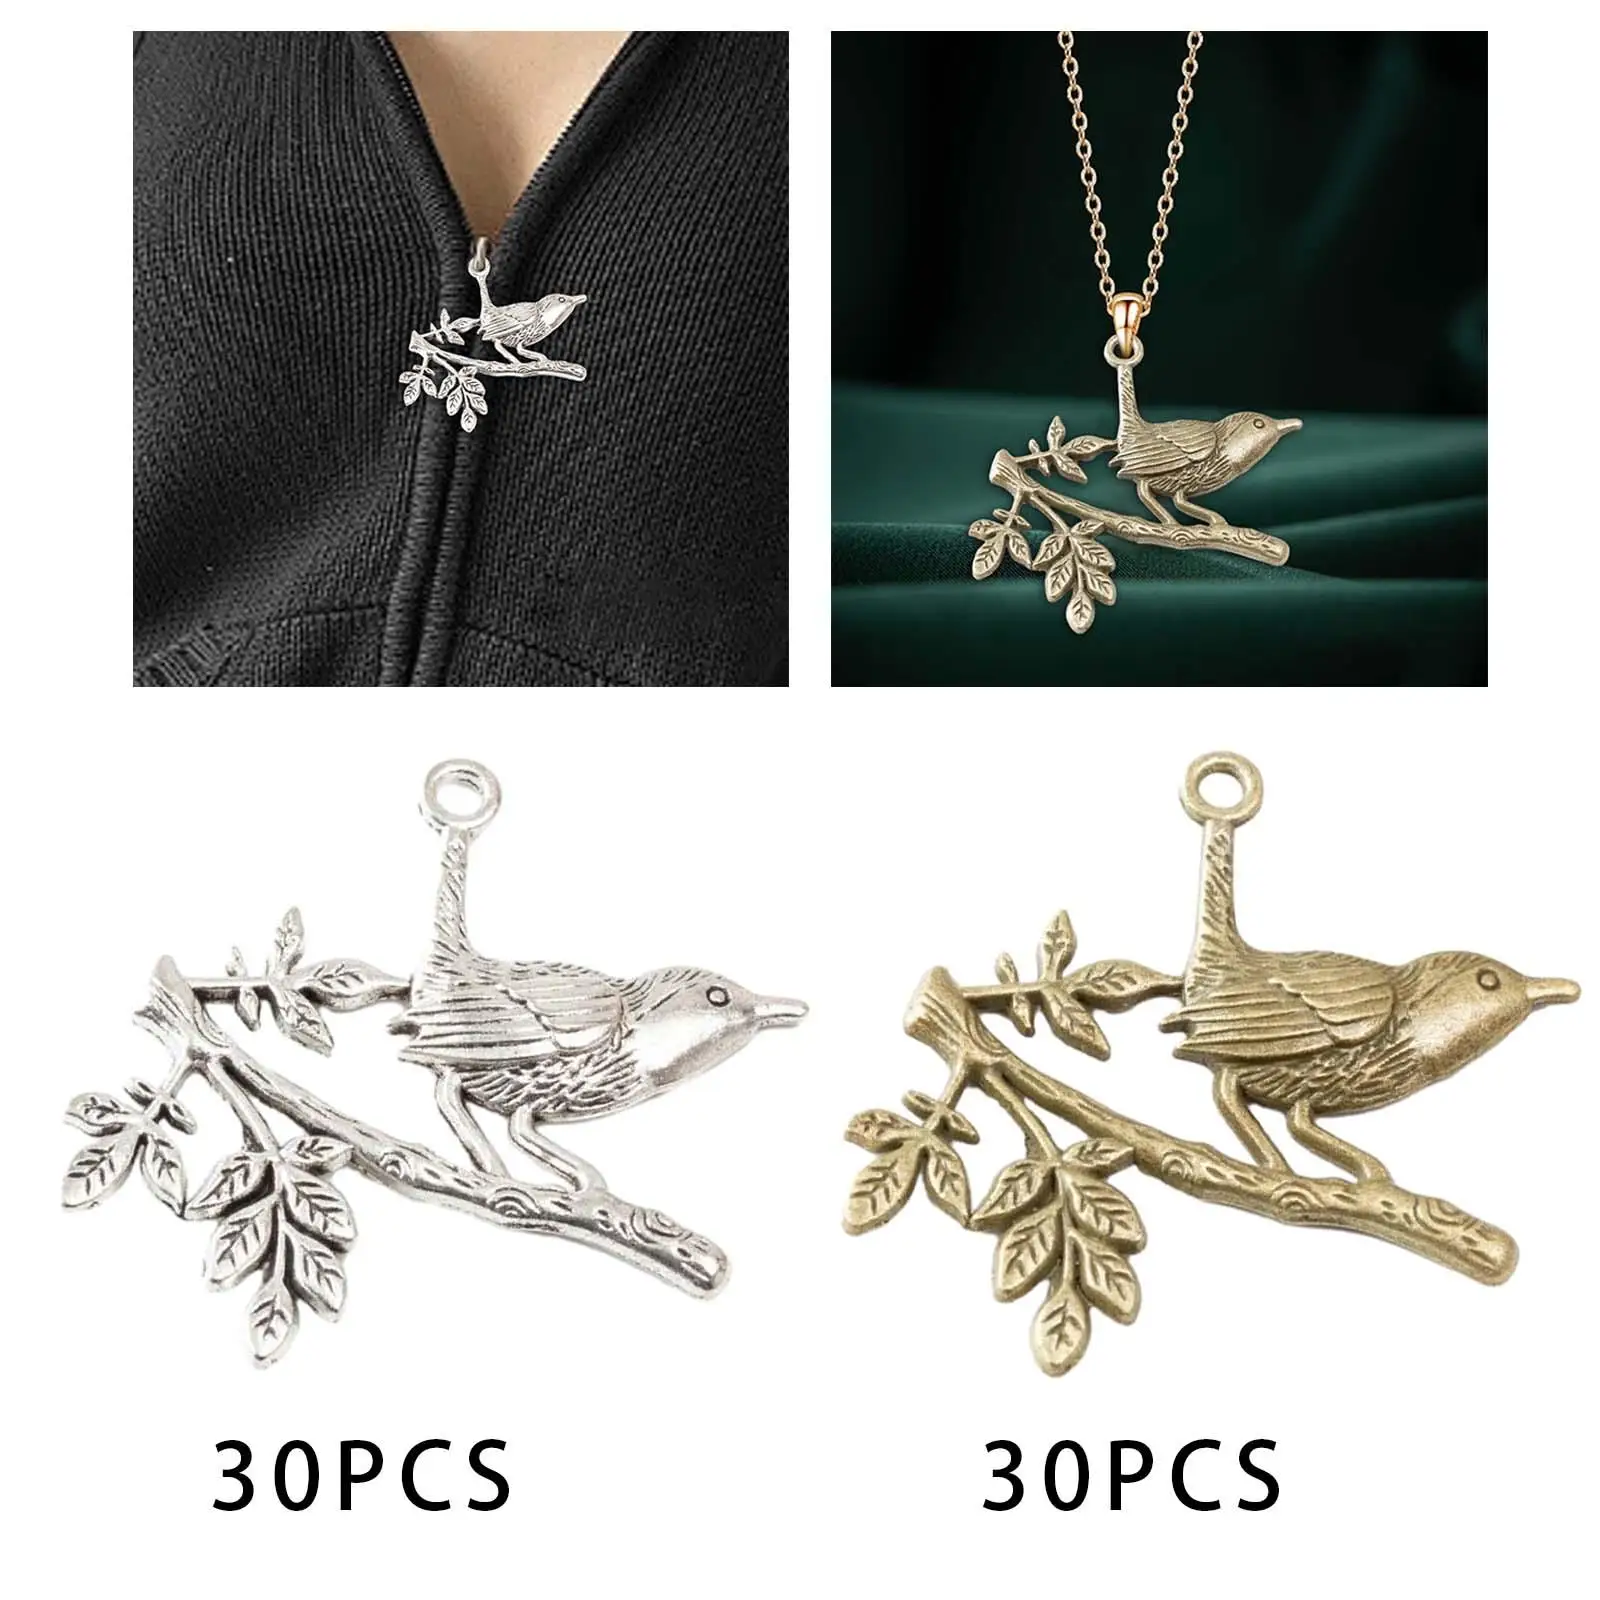 30 Pieces Bird Charms Vintage Metal Supplies Beads Pendants for Handmade Crafts Necklace Bag Decoration Zippers Earrings